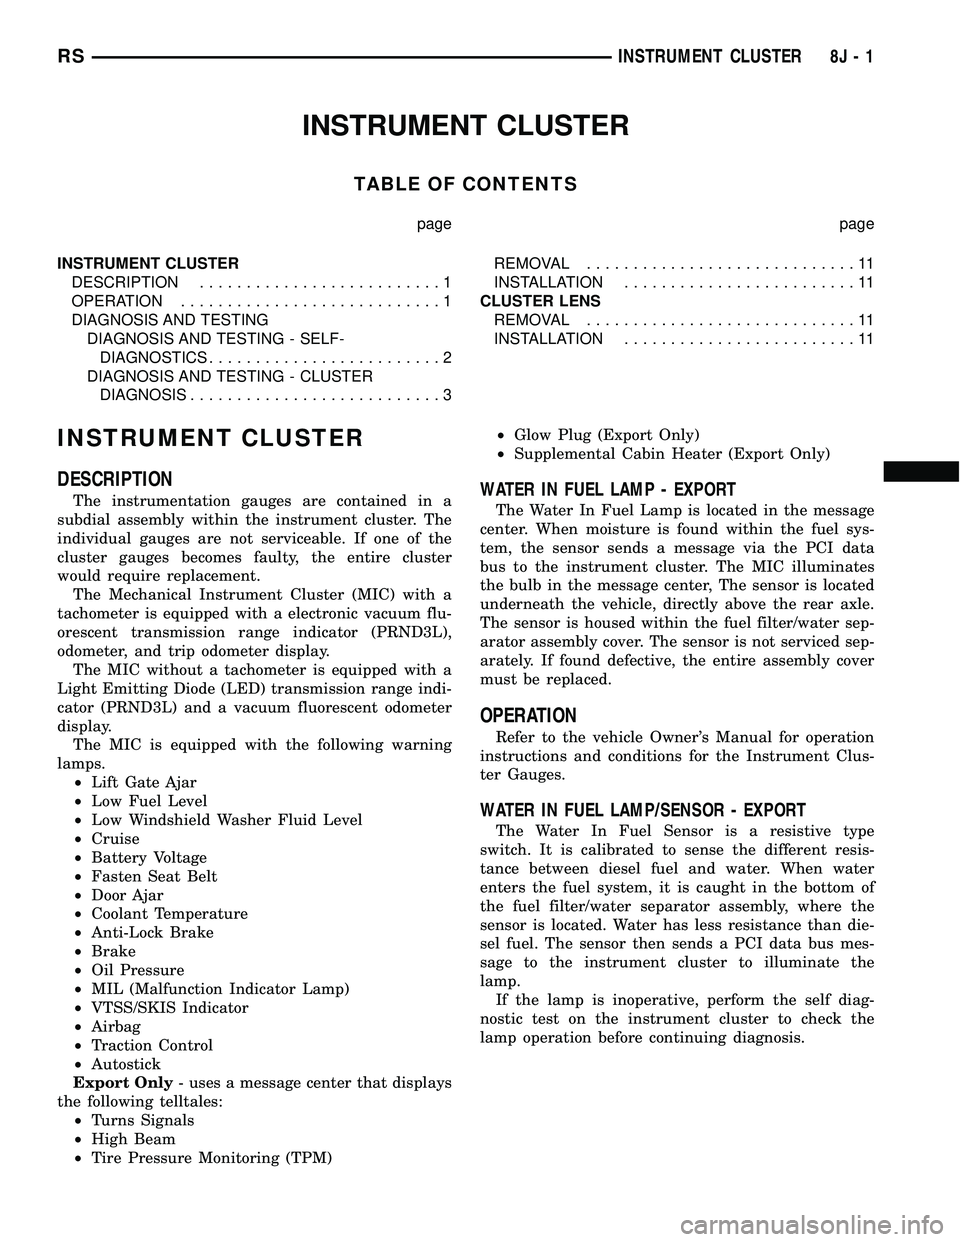 CHRYSLER VOYAGER 2005 Owners Manual INSTRUMENT CLUSTER
TABLE OF CONTENTS
page page
INSTRUMENT CLUSTER
DESCRIPTION..........................1
OPERATION............................1
DIAGNOSIS AND TESTING
DIAGNOSIS AND TESTING - SELF-
DIAG